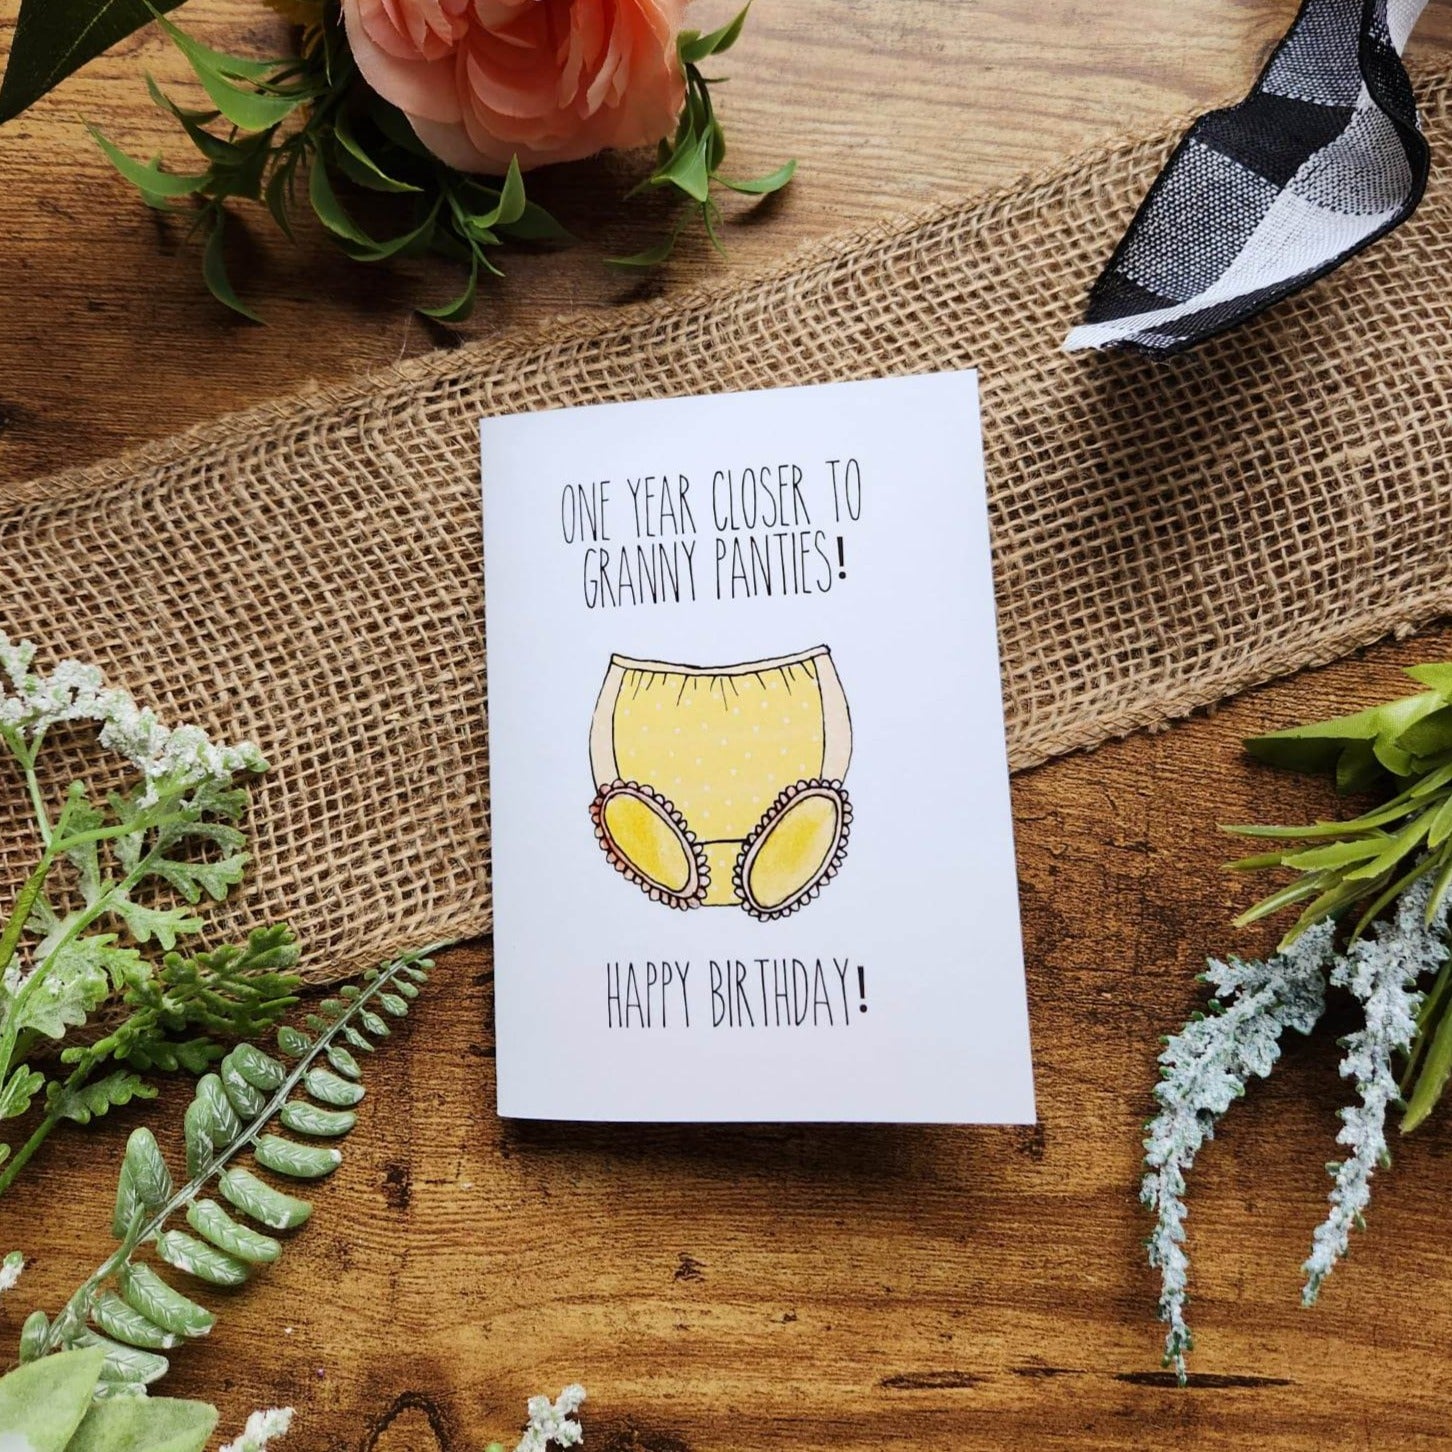 Missing Panties: Funny Birthday Greeting Card for Women